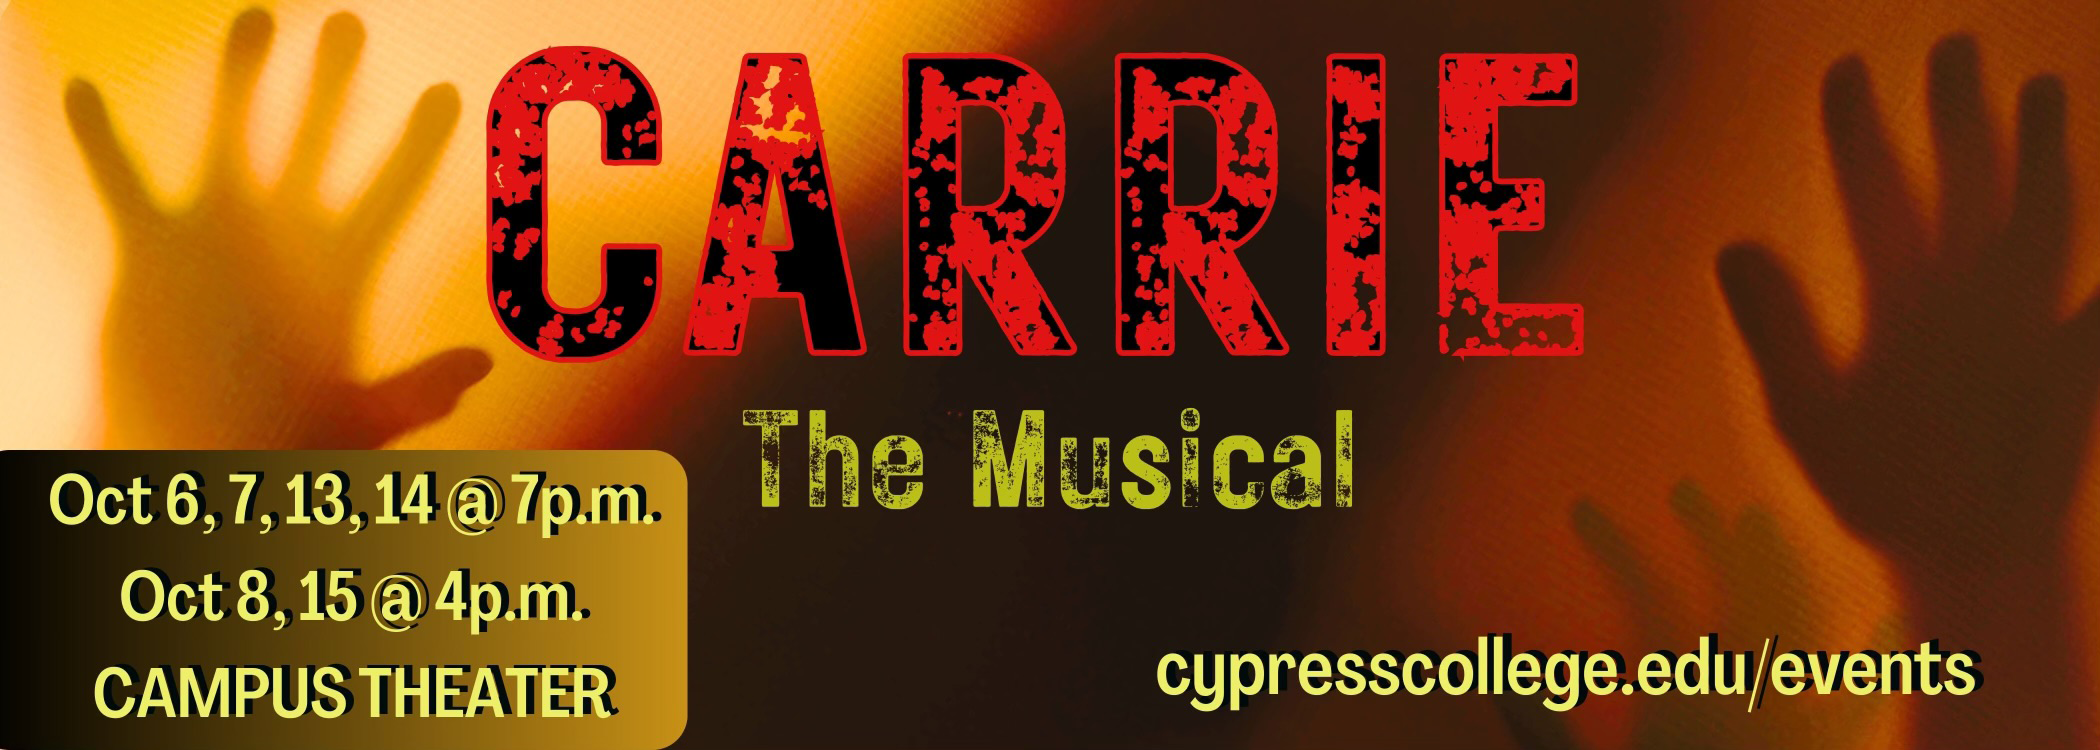 A graphic for Carrie: The Musical with dates and a website that are included in the body of this post.